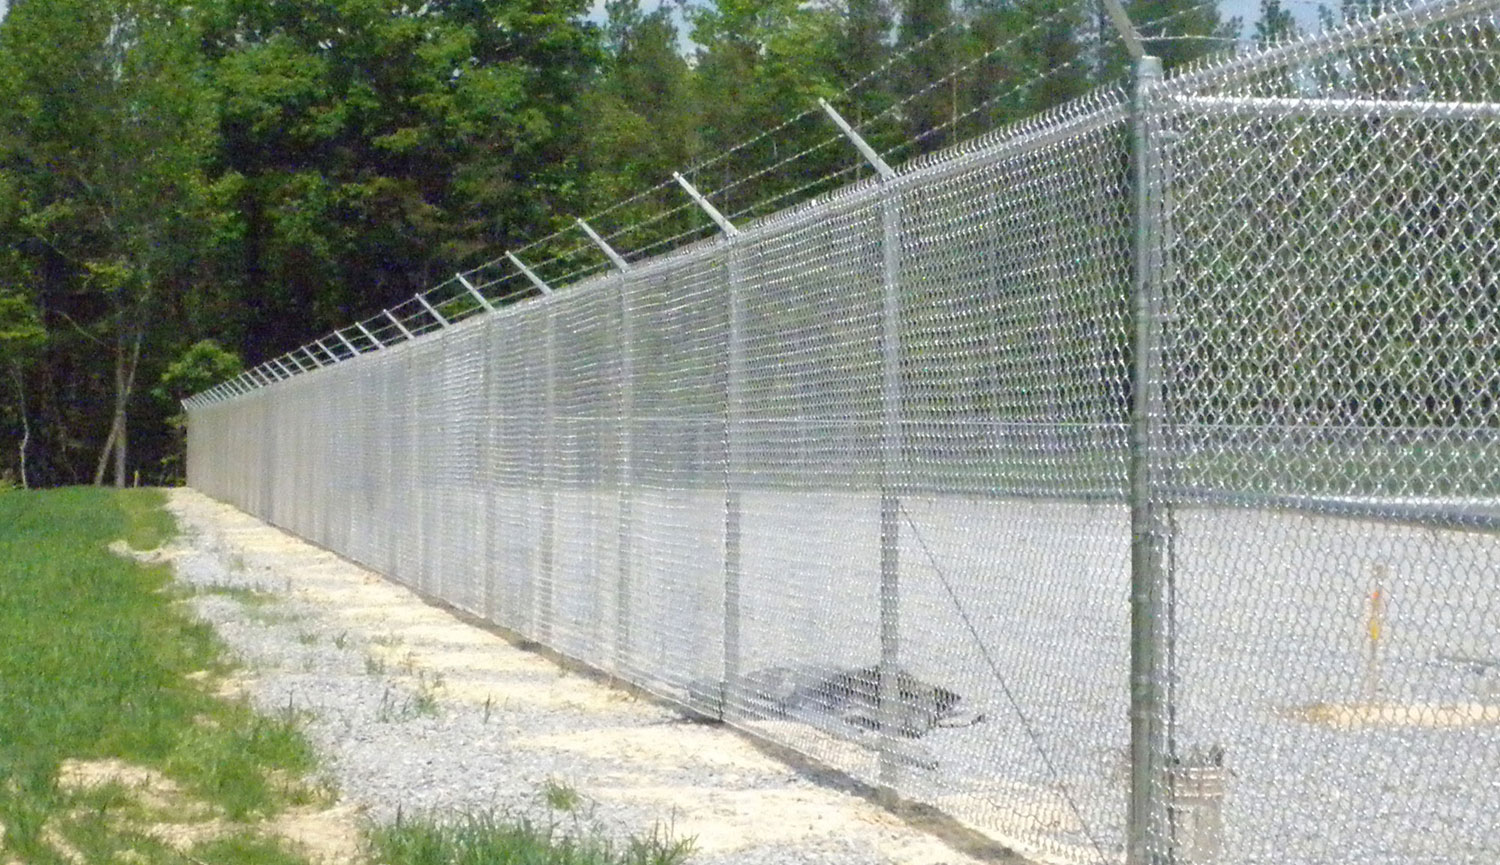 High security chain-link fence